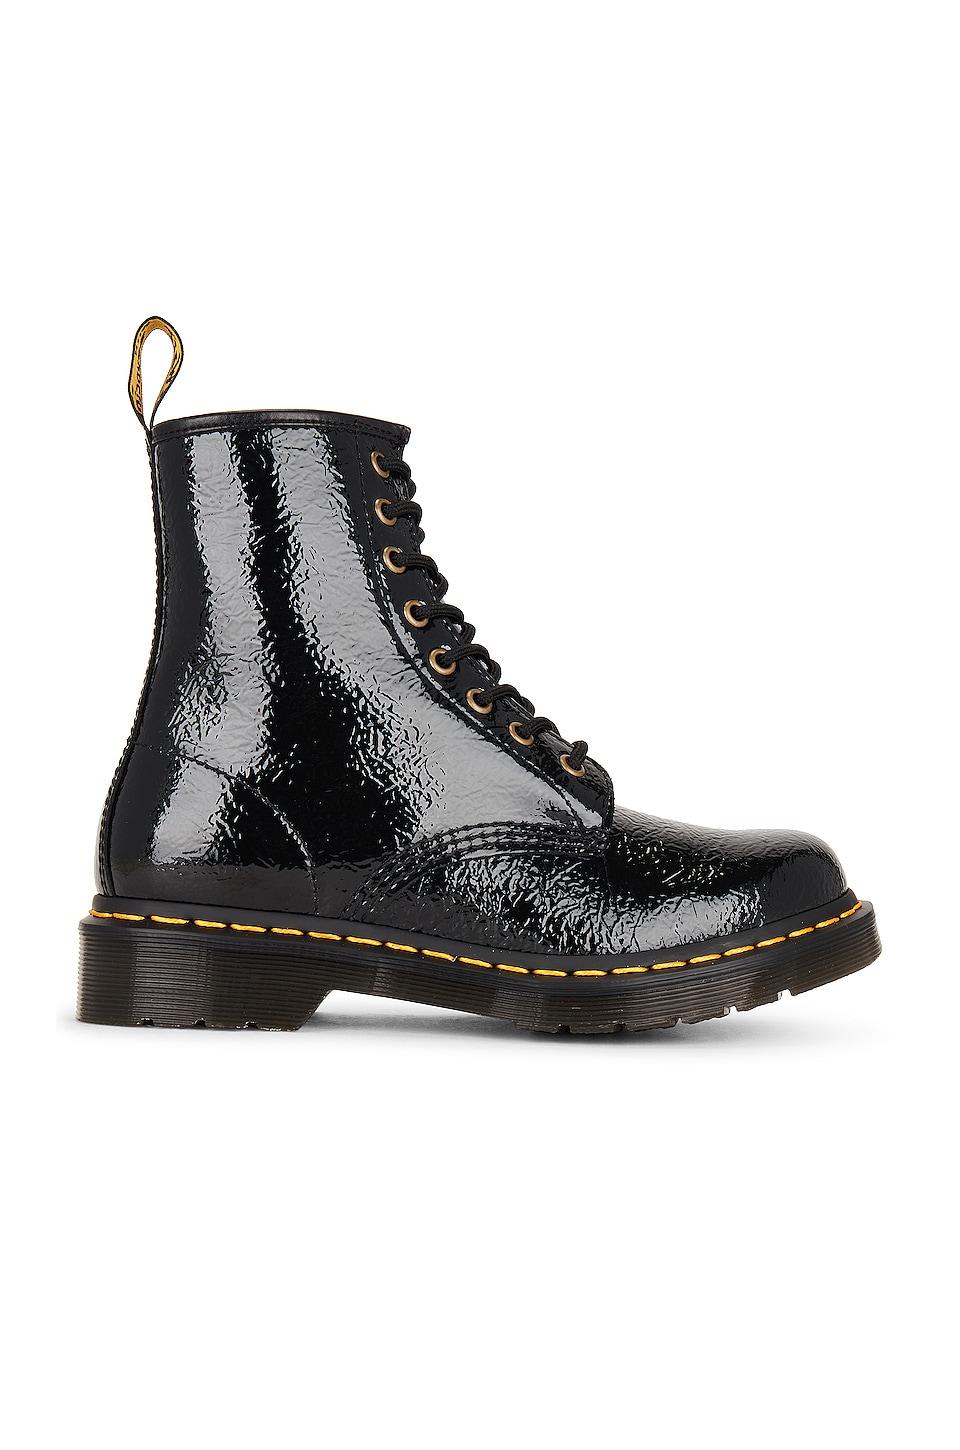 Dr. Martens 1460 Distressed Patent Boot in Black | Lyst